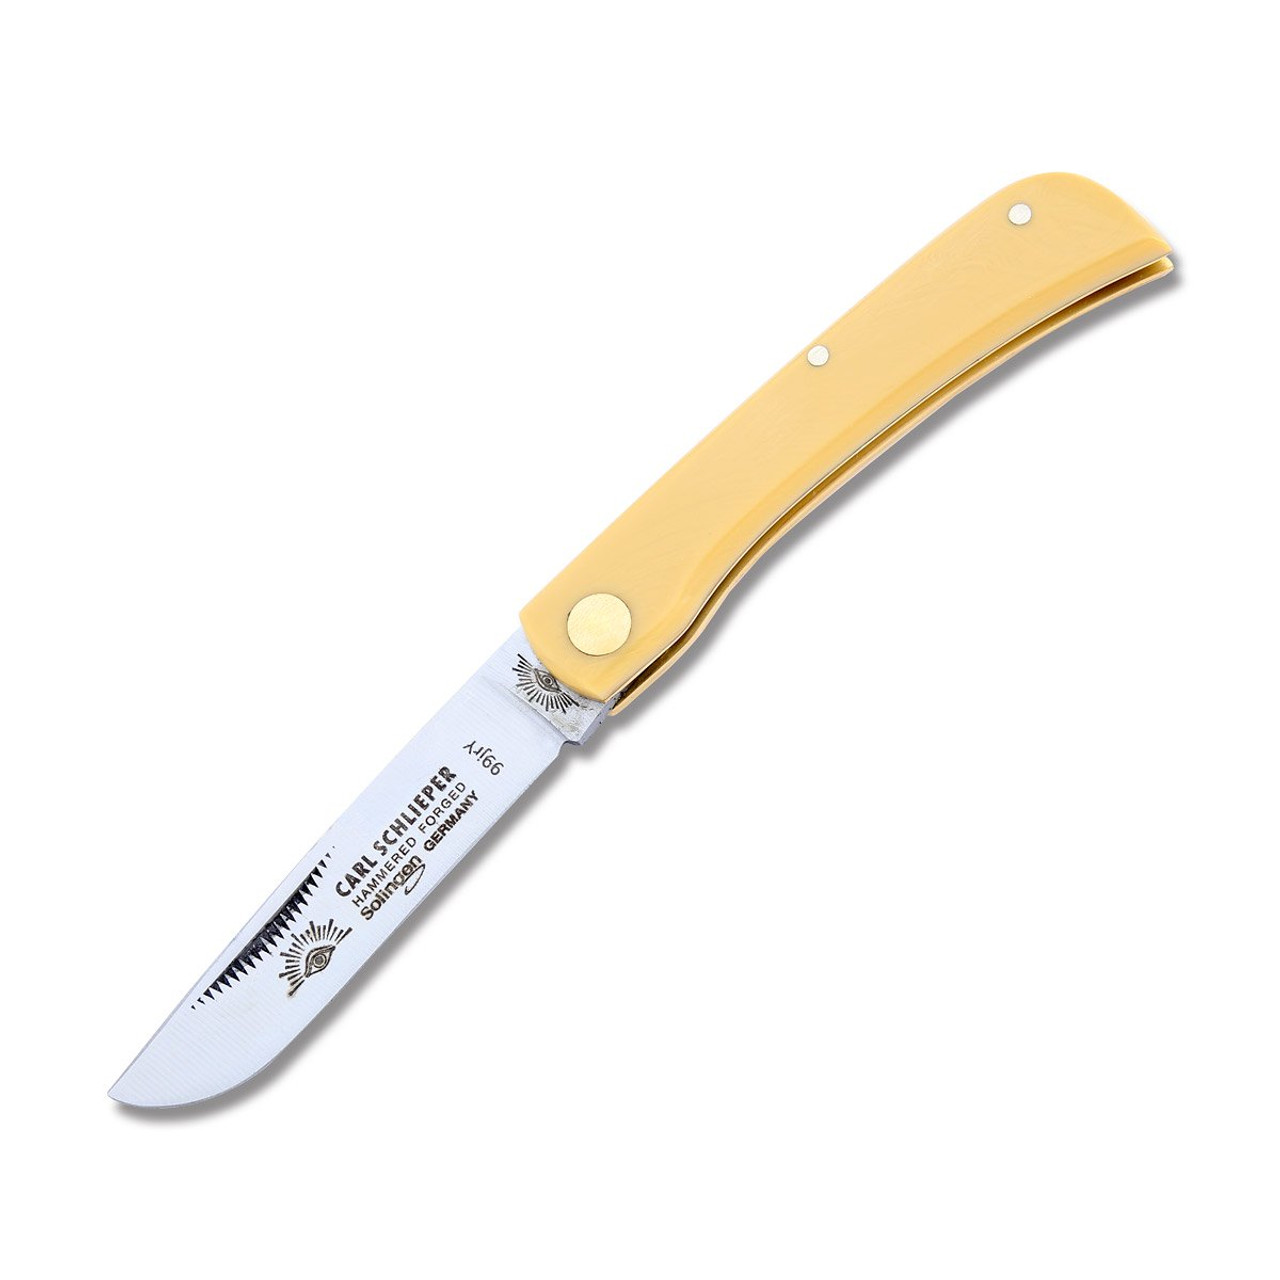 Reviews and Ratings for German Eye Brand Carl Schlieper Clodbuster Jr.  Folding Knife 2.875 Blade, Multi-Colored Plastic Handles - KnifeCenter -  GE99JRCRO